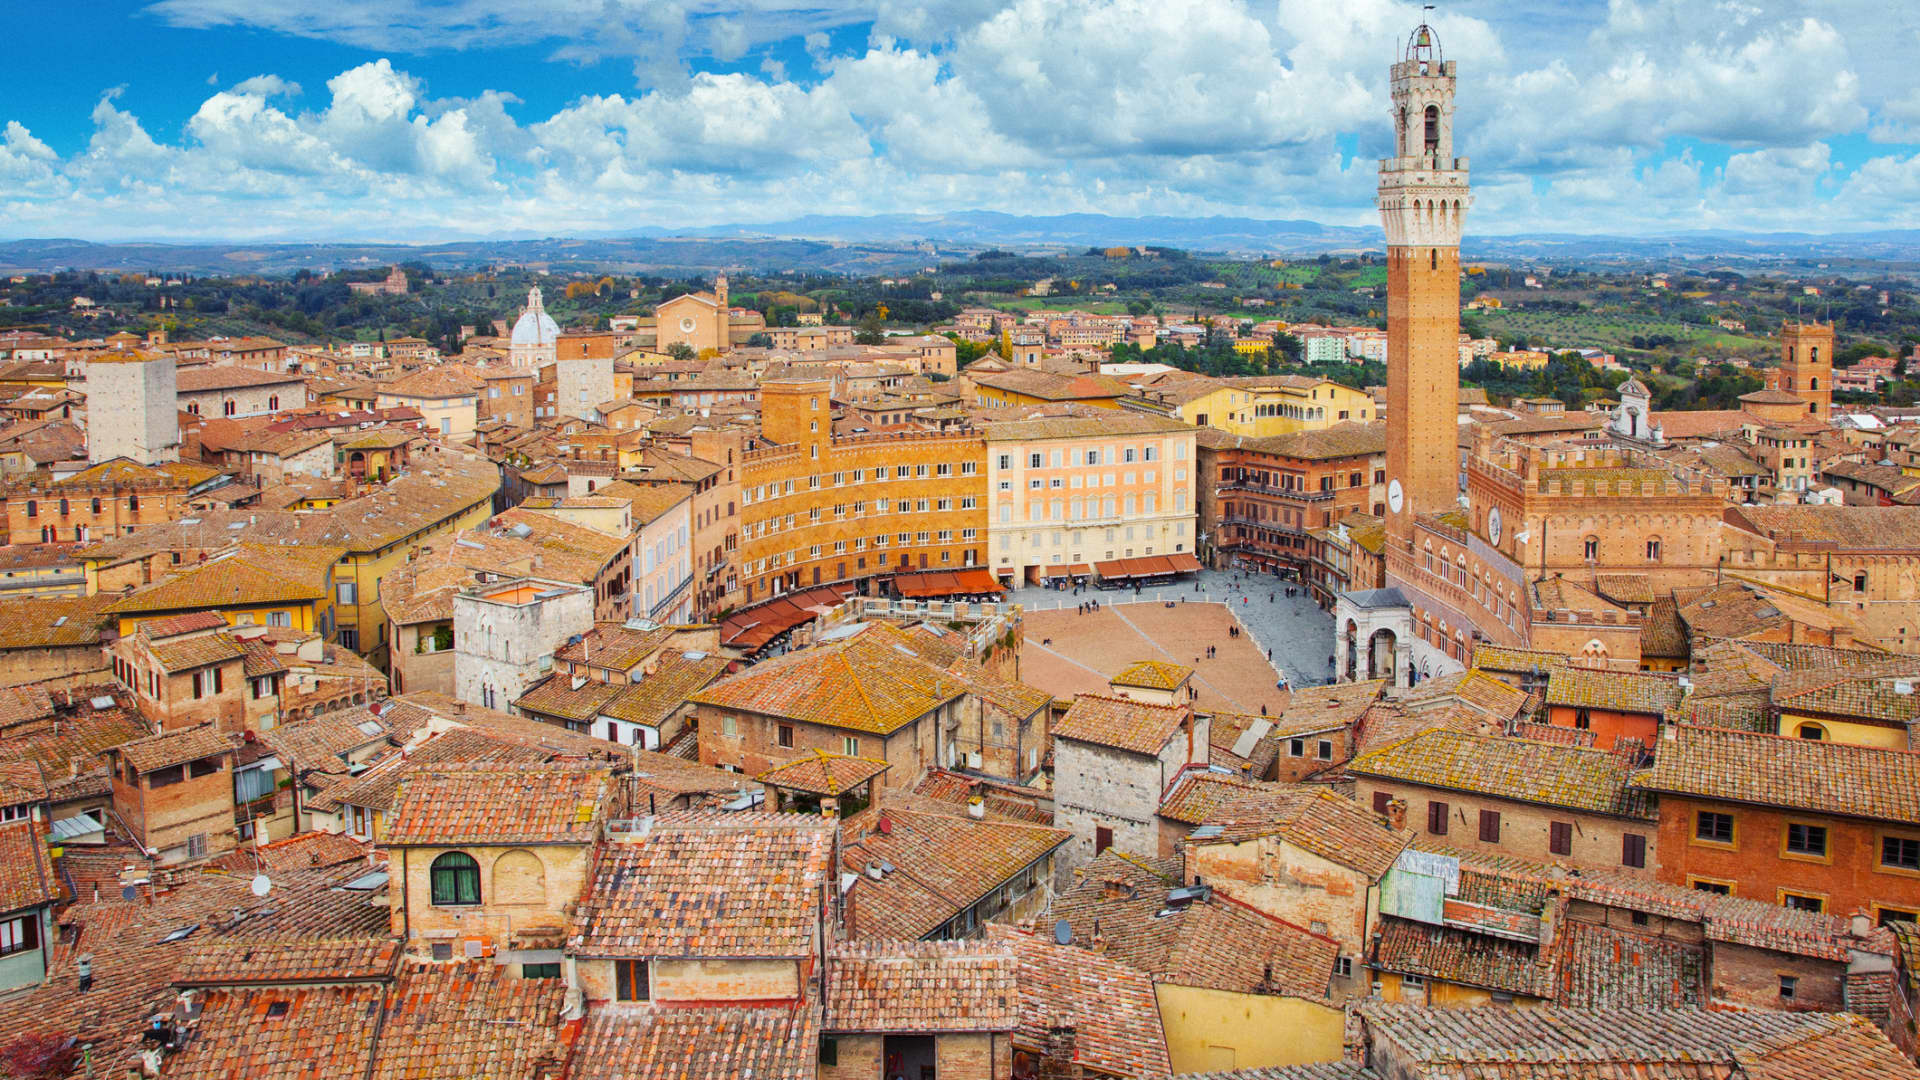 Siena is a short distance from Castello di Ama.